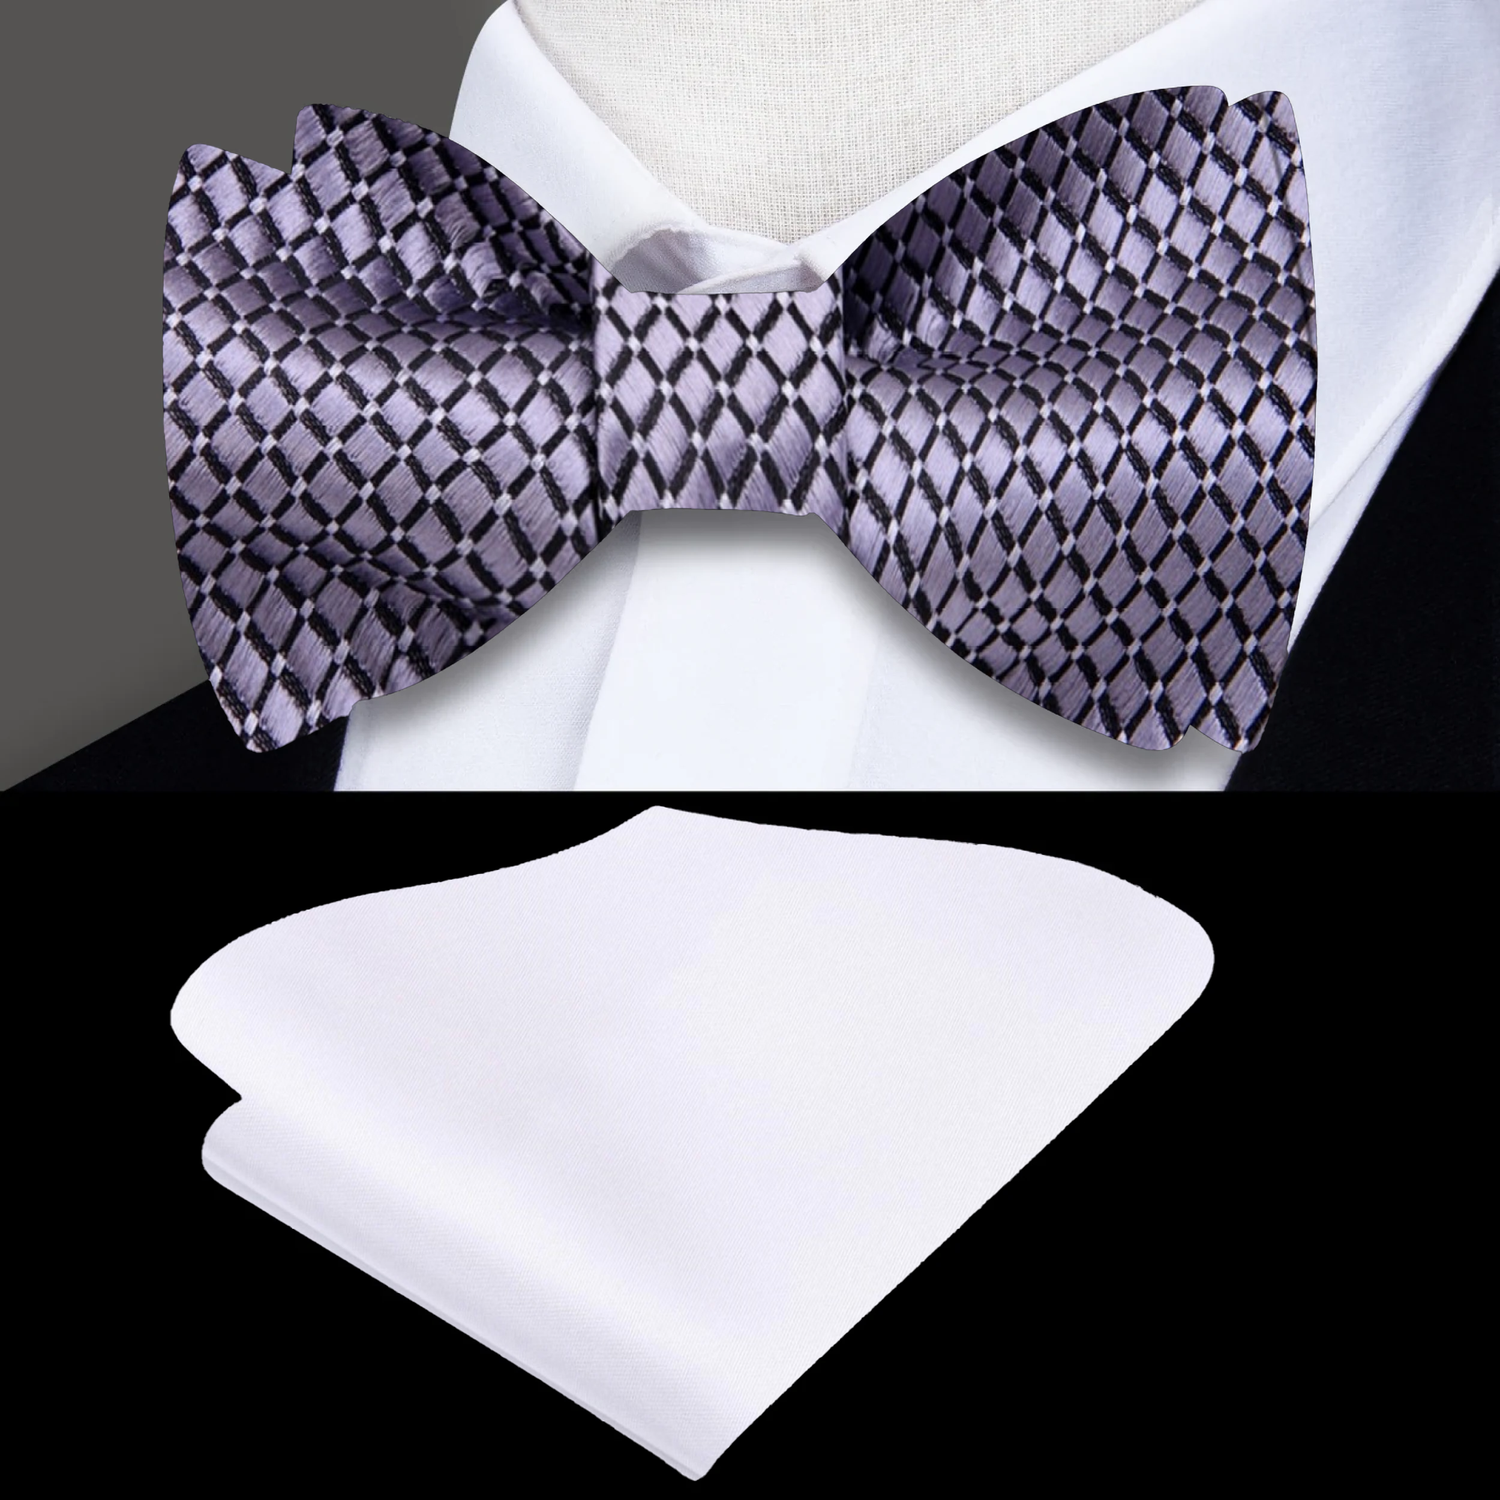  Silver Small Geometric Diamond With Small Dots Pattern Silk Self Tie Bow Tie With Accenting White Pocket Square